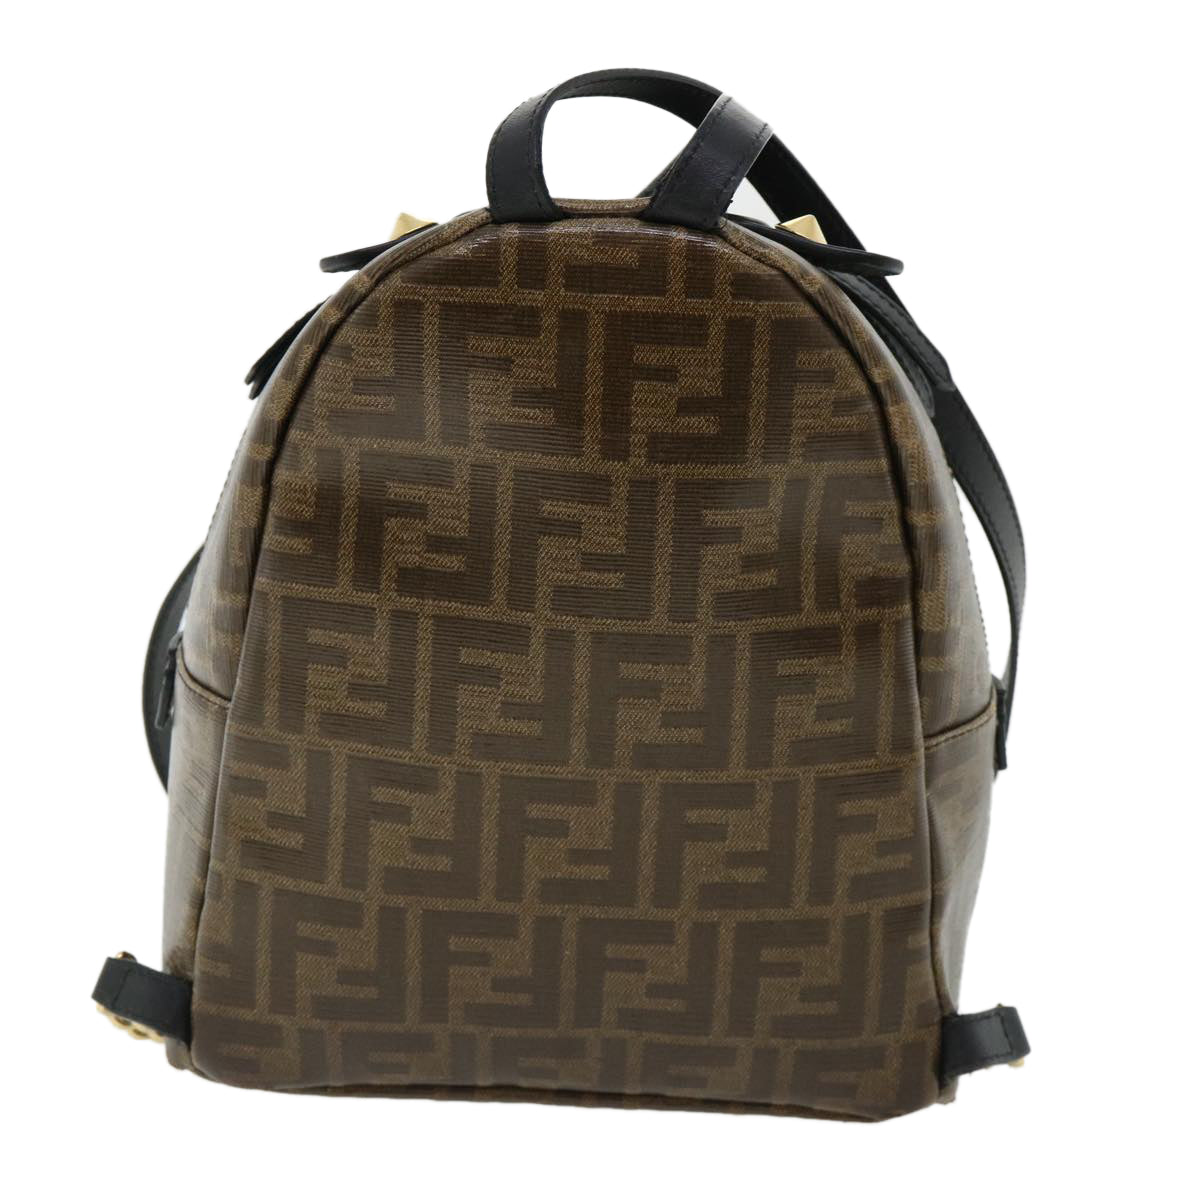 FENDI Zucca Canvas Backpack Coated Canvas Brown Black 8BZ038 Auth 32630A - 0